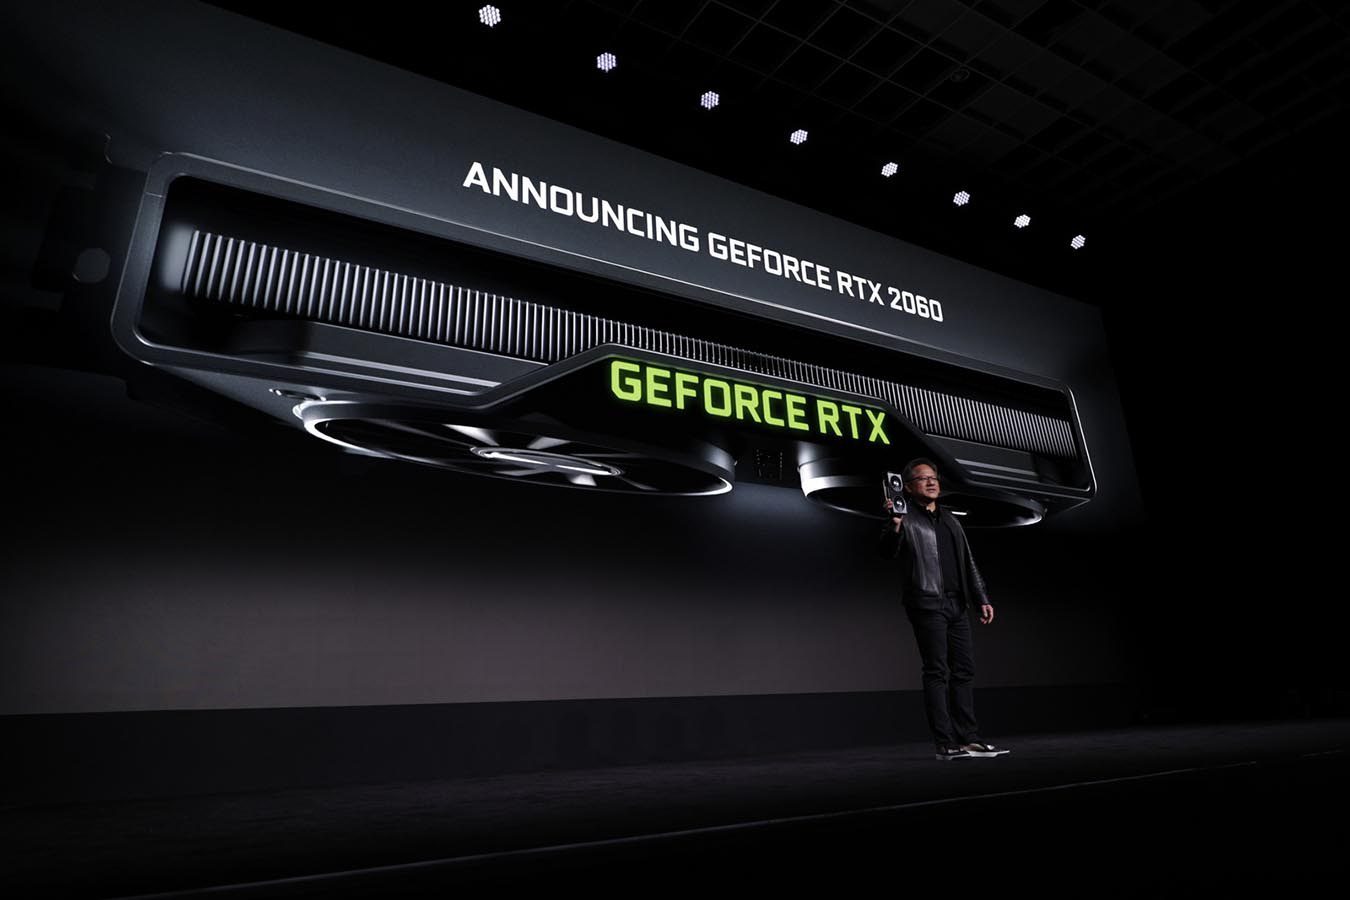 CES 2019: PNY has your new NVIDIA GeForce RTX 2060 graphics cards covered